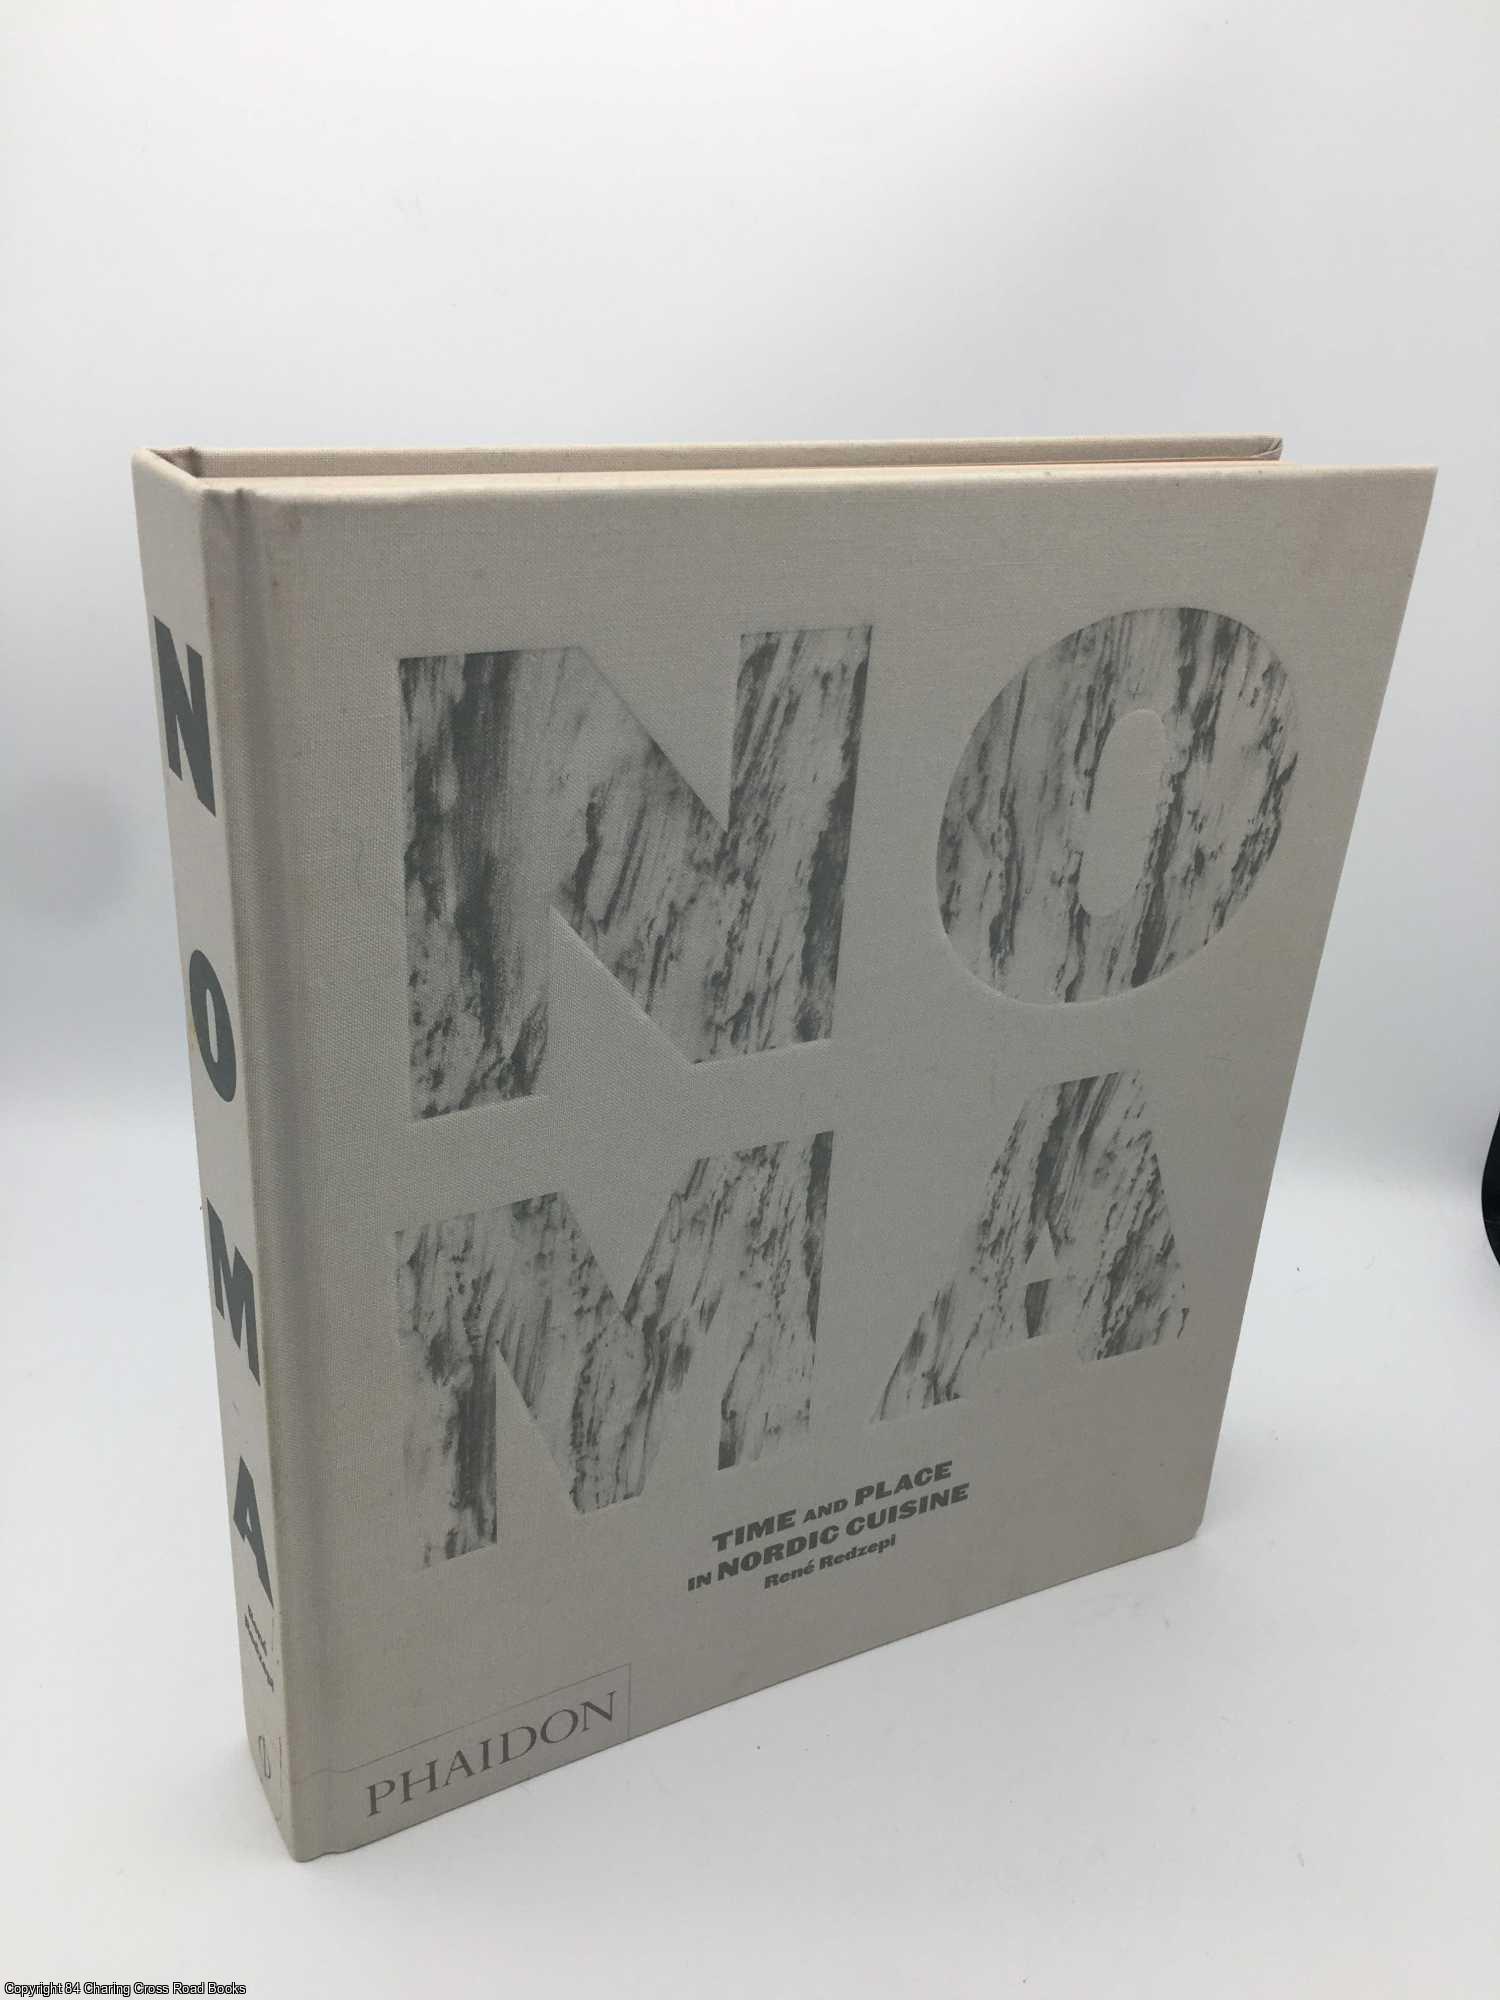 Noma: Time and Place in Nordic Cuisine Signed by Redzepi by René Redzepi on  84 Charing Cross Rare Books